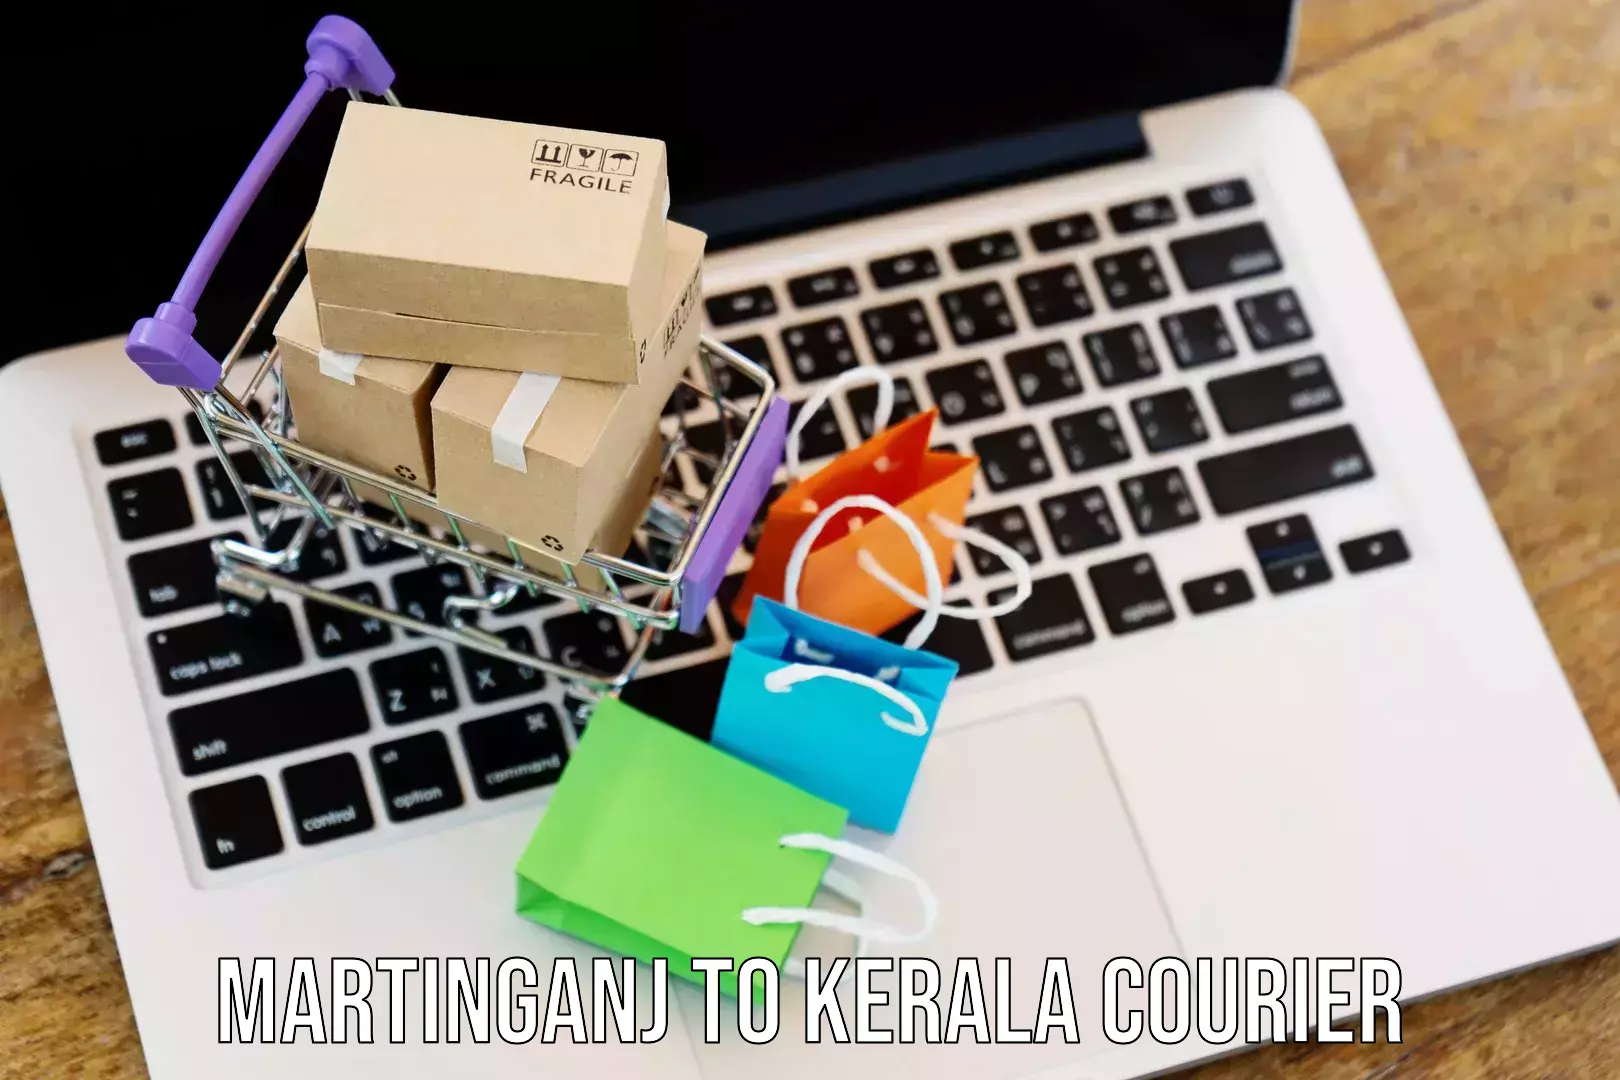 Sustainable delivery practices Martinganj to Kerala